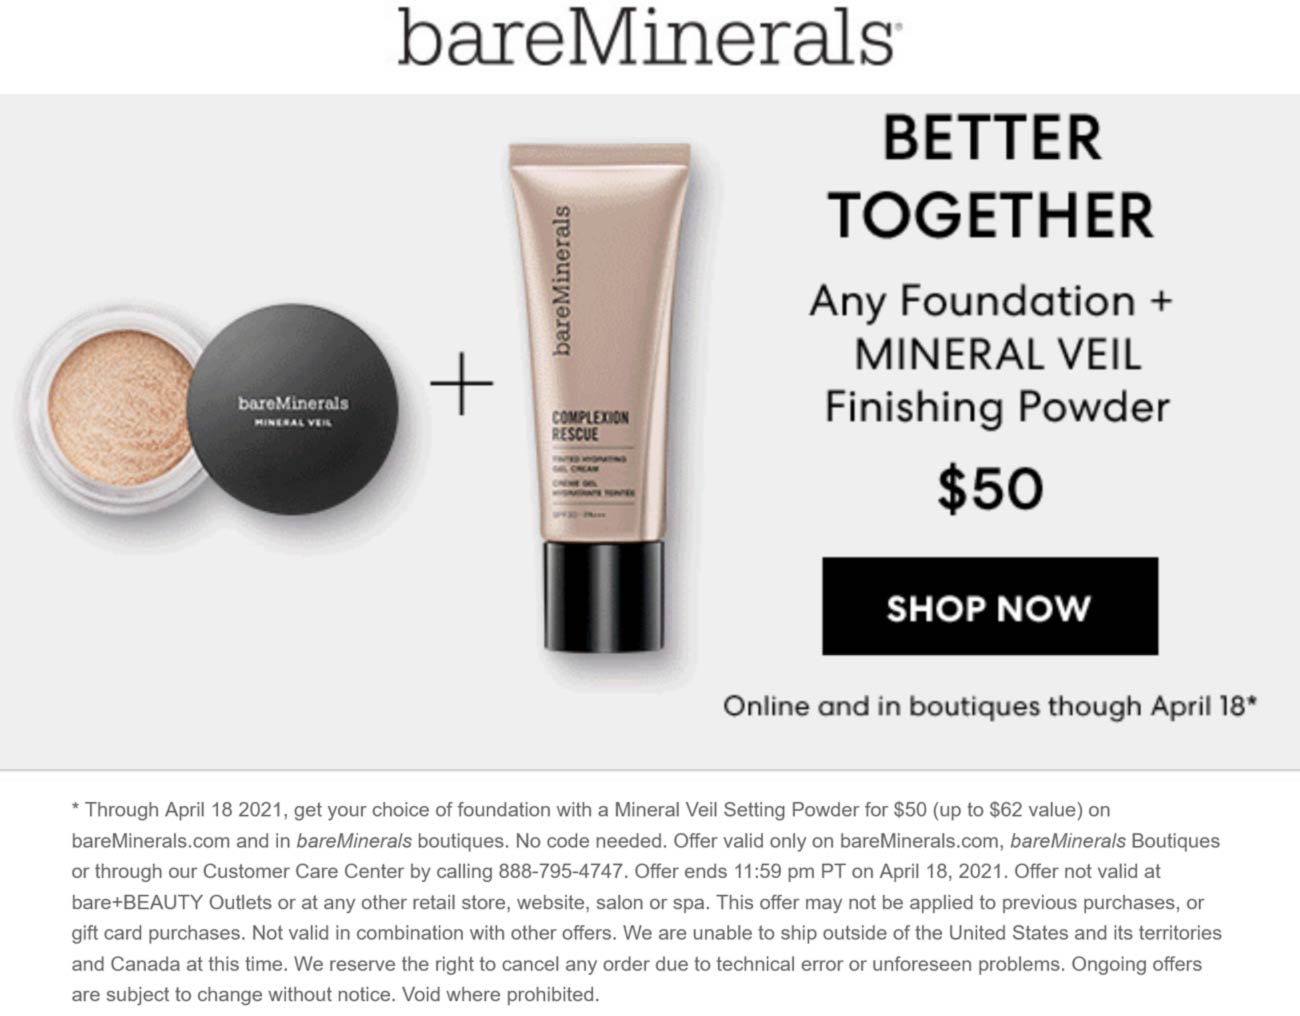 bareMinerals stores Coupon  Any foundation + finishing powder = $50 at bareMinerals, ditto online #bareminerals 